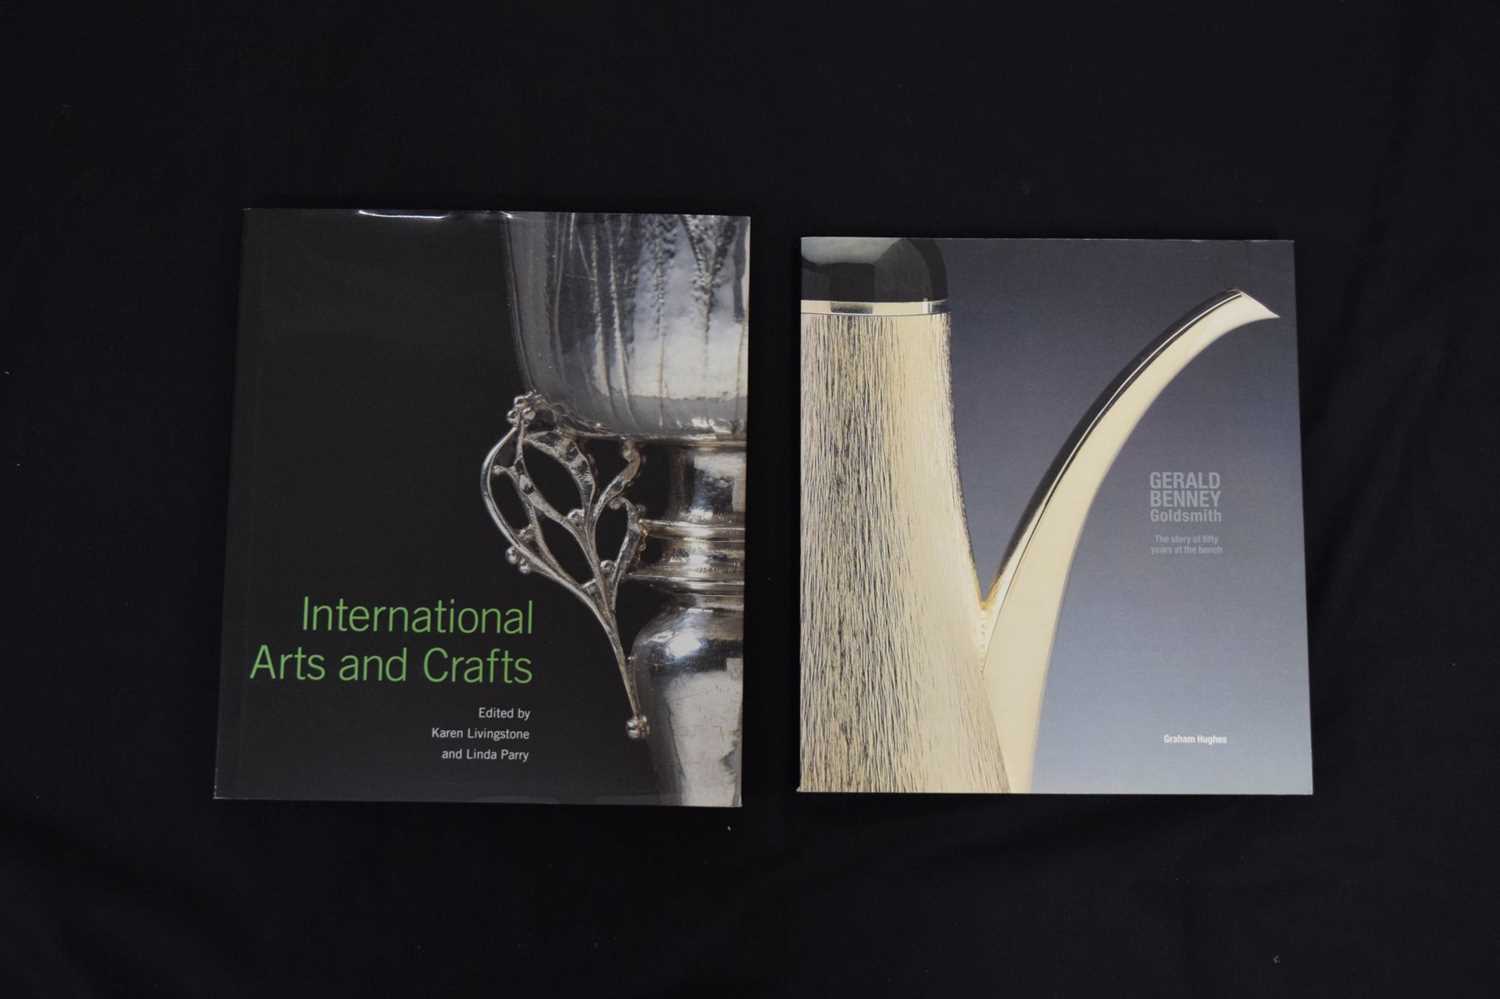 Two art reference books - Arts and Crafts, and Gerald Benney - Image 4 of 7